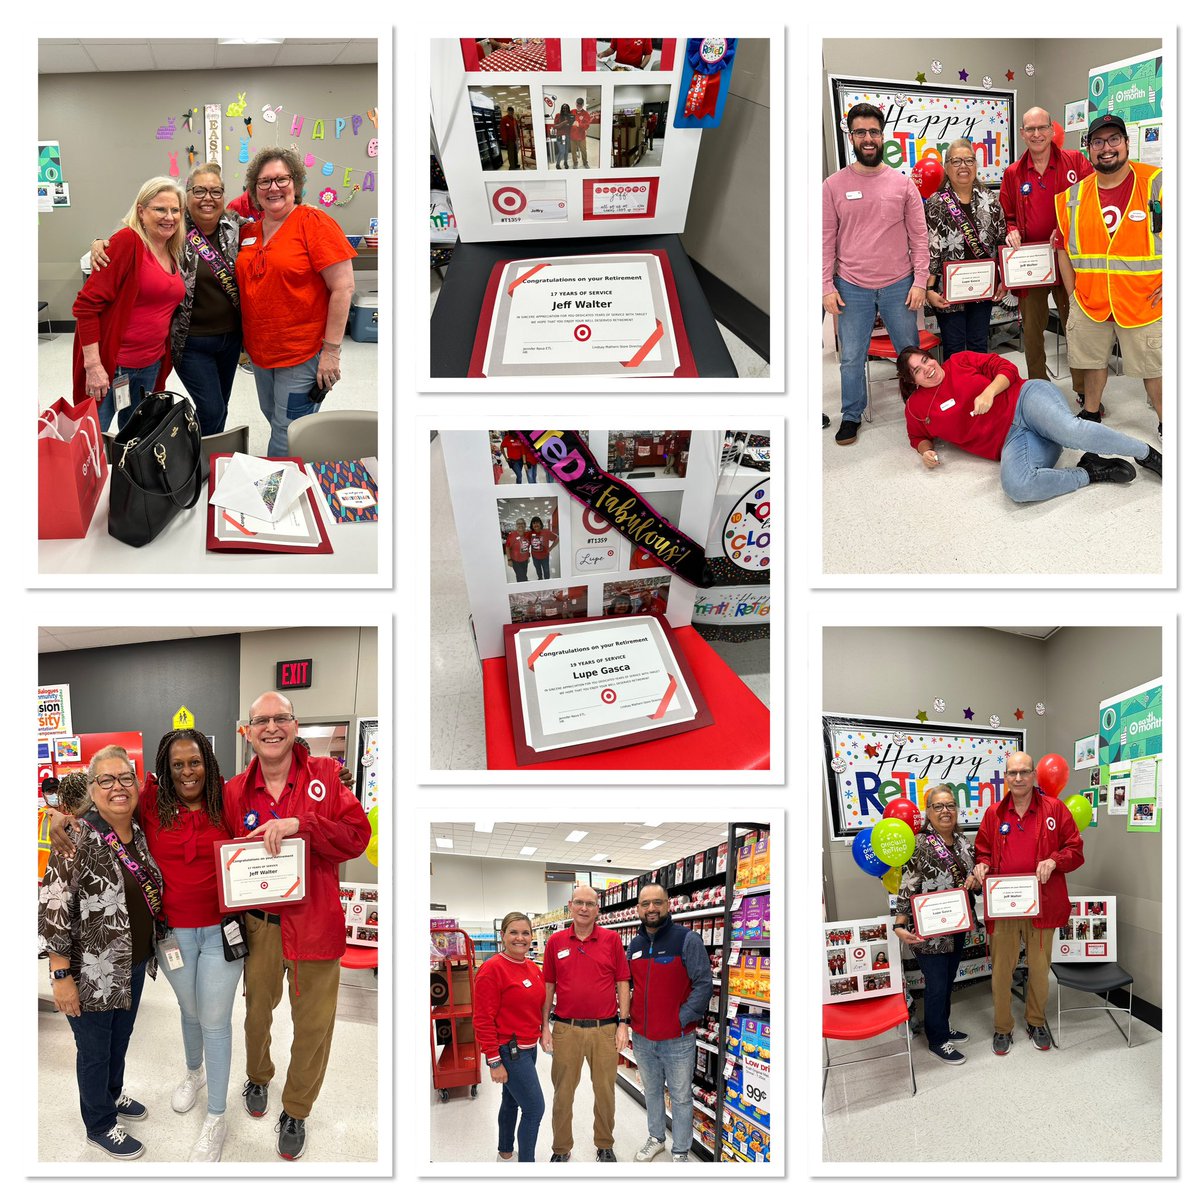 Today we celebrated 2 team members retirement. Lupe 19 years and Jeff 17 years! #happyretirement #offtheclock #worksomewhereyoulove #wearetarget
#T1359 #D311 #missouricity #texas @SyedR1zvi @emilytux